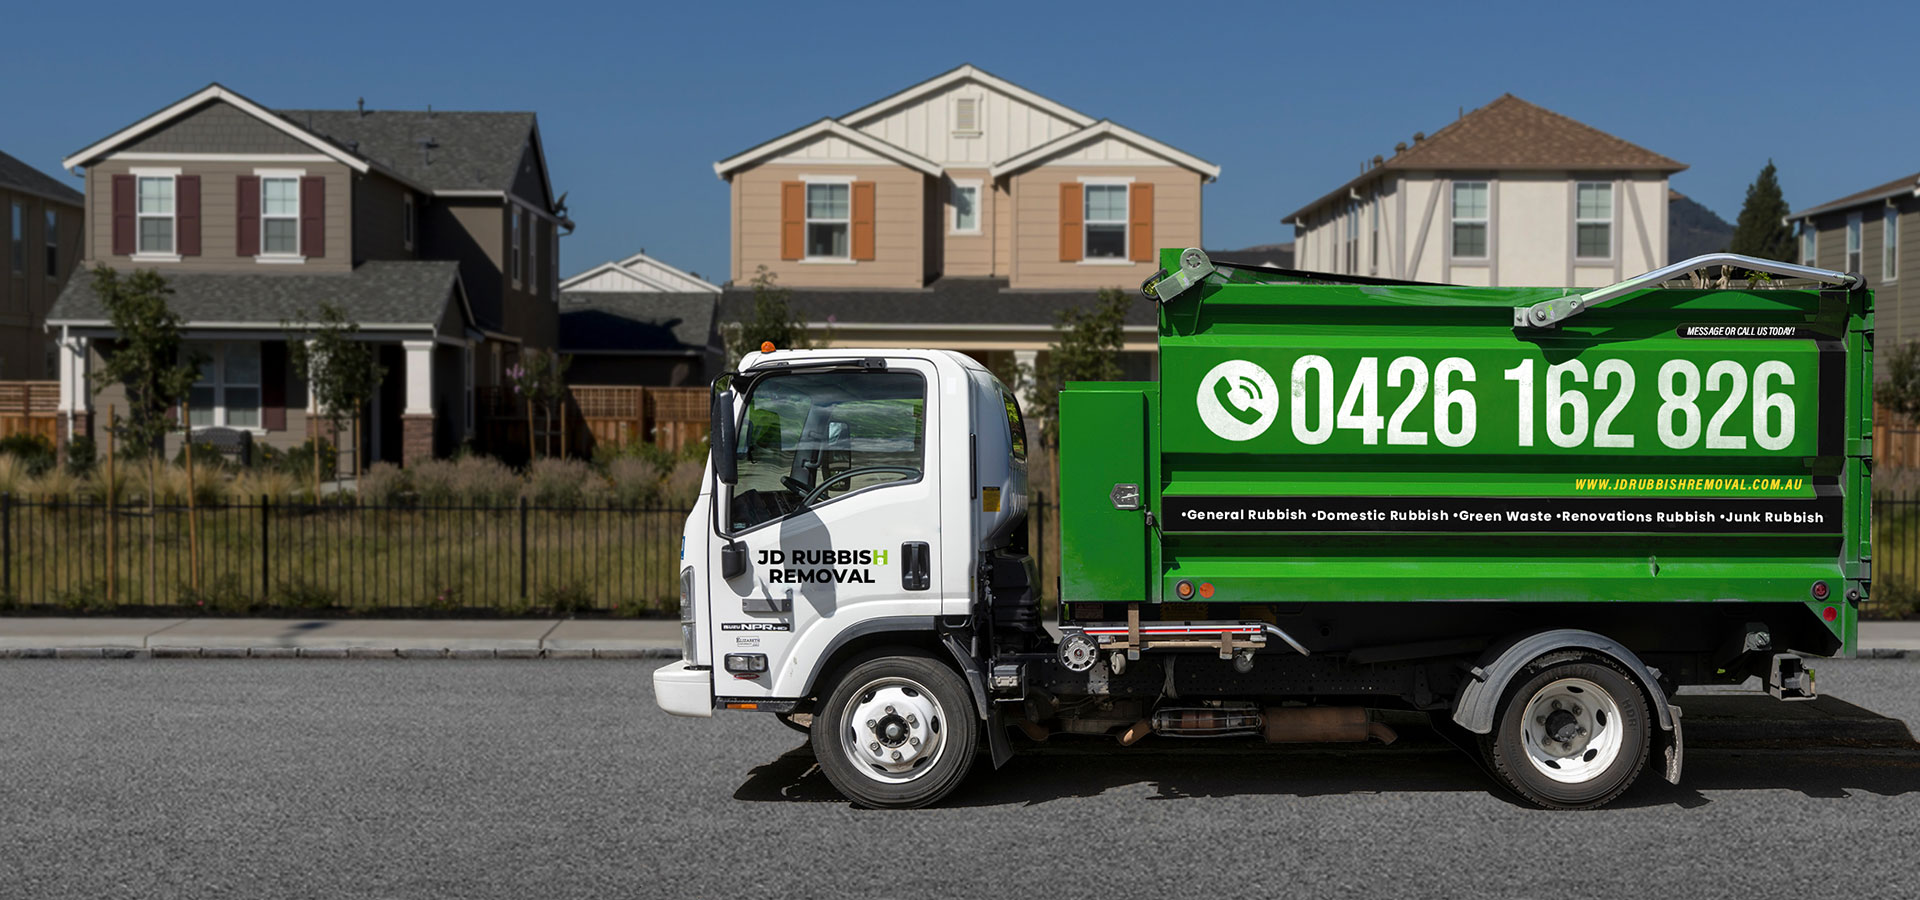 Same Day Rubbish Removal Melbourne | Junk, Household, & Green Waste